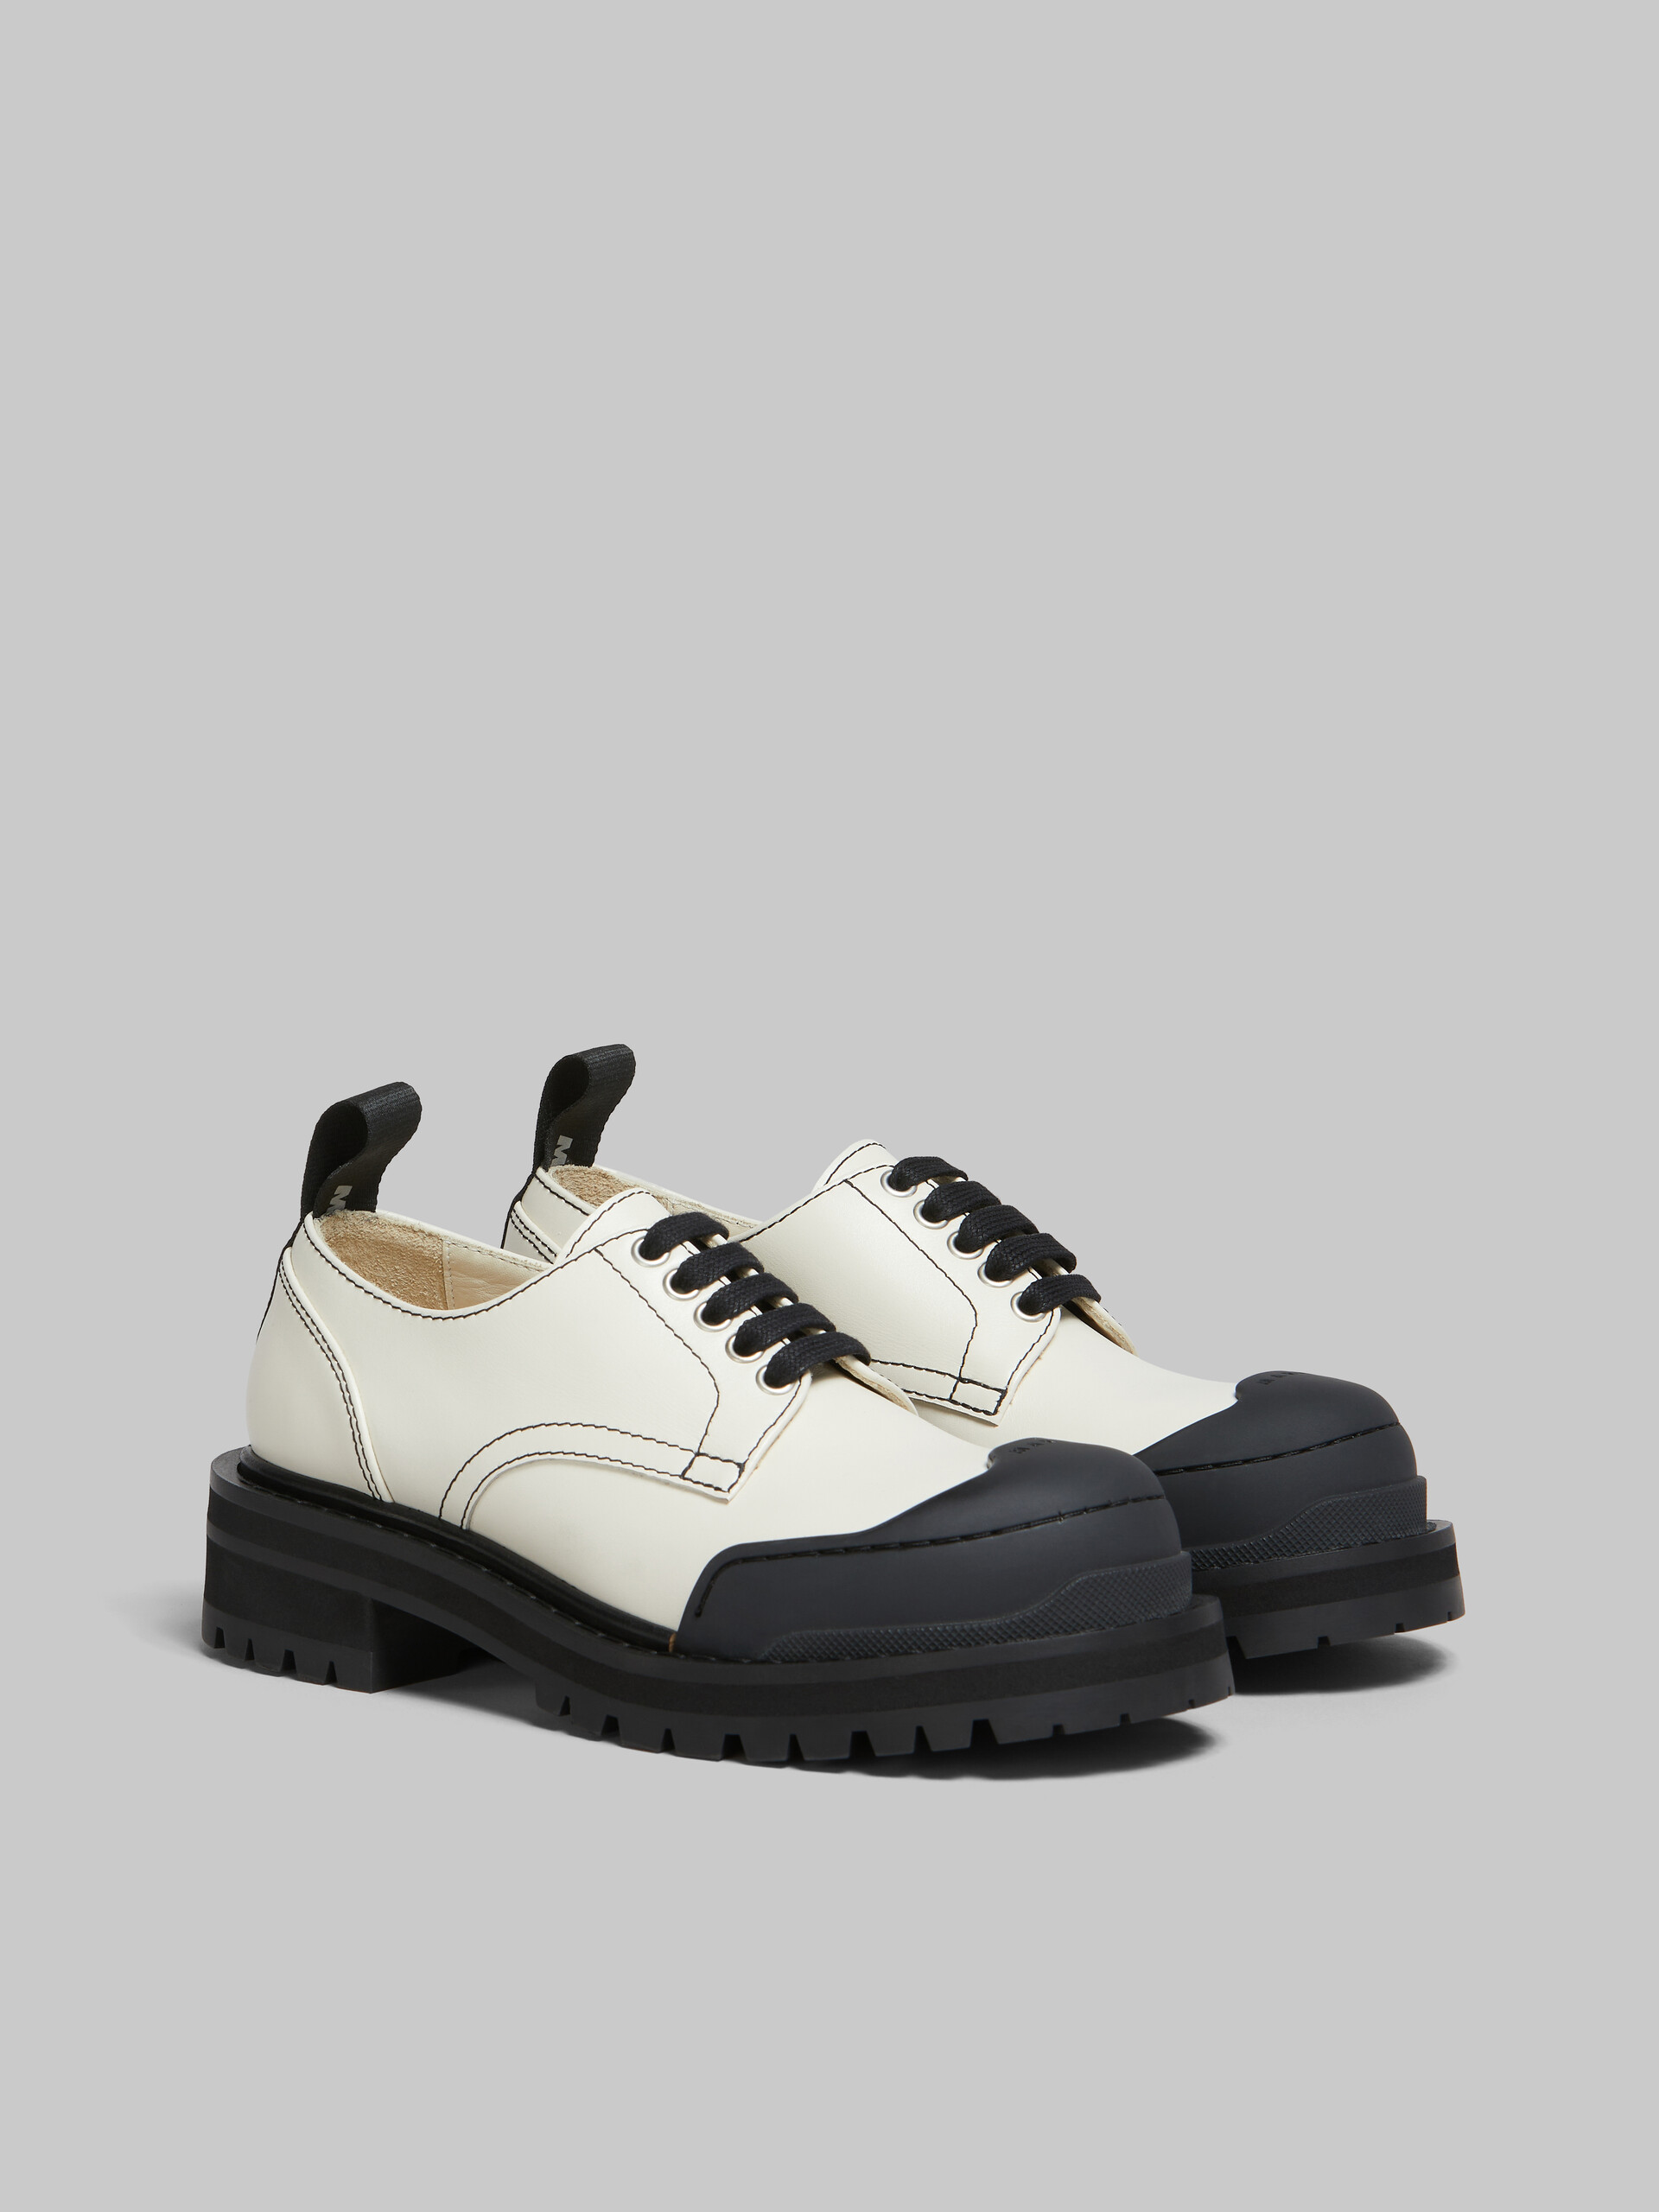 Chaussures derby Dada Army en cuir blanc - Chaussures à Lacets - Image 2